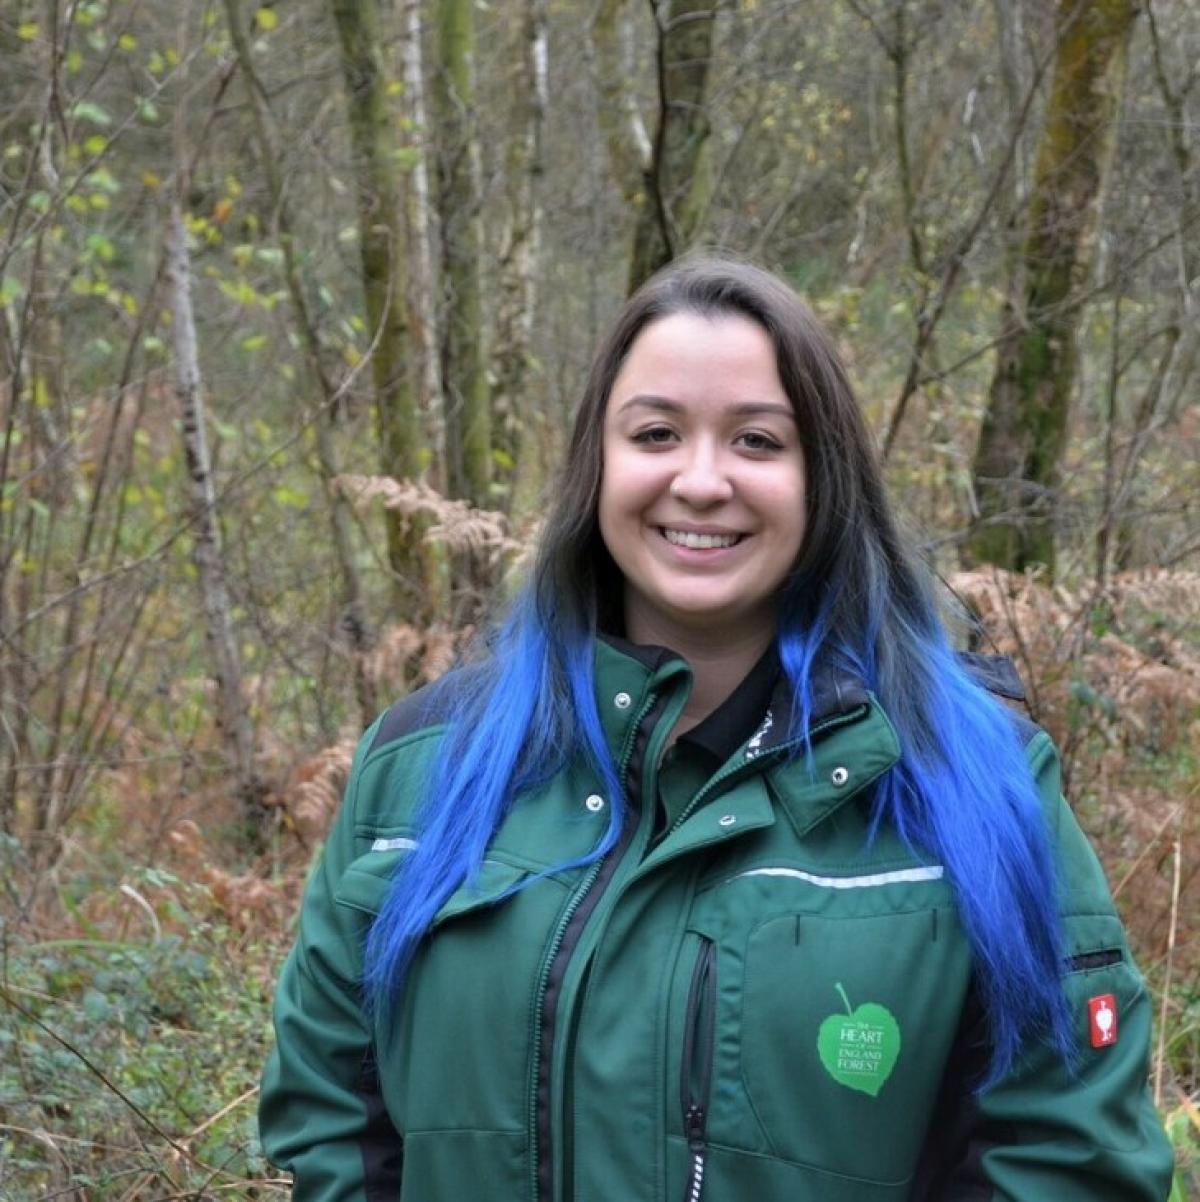 Biodiversity Officer Tasha stood in the Forest smiling at the camera 